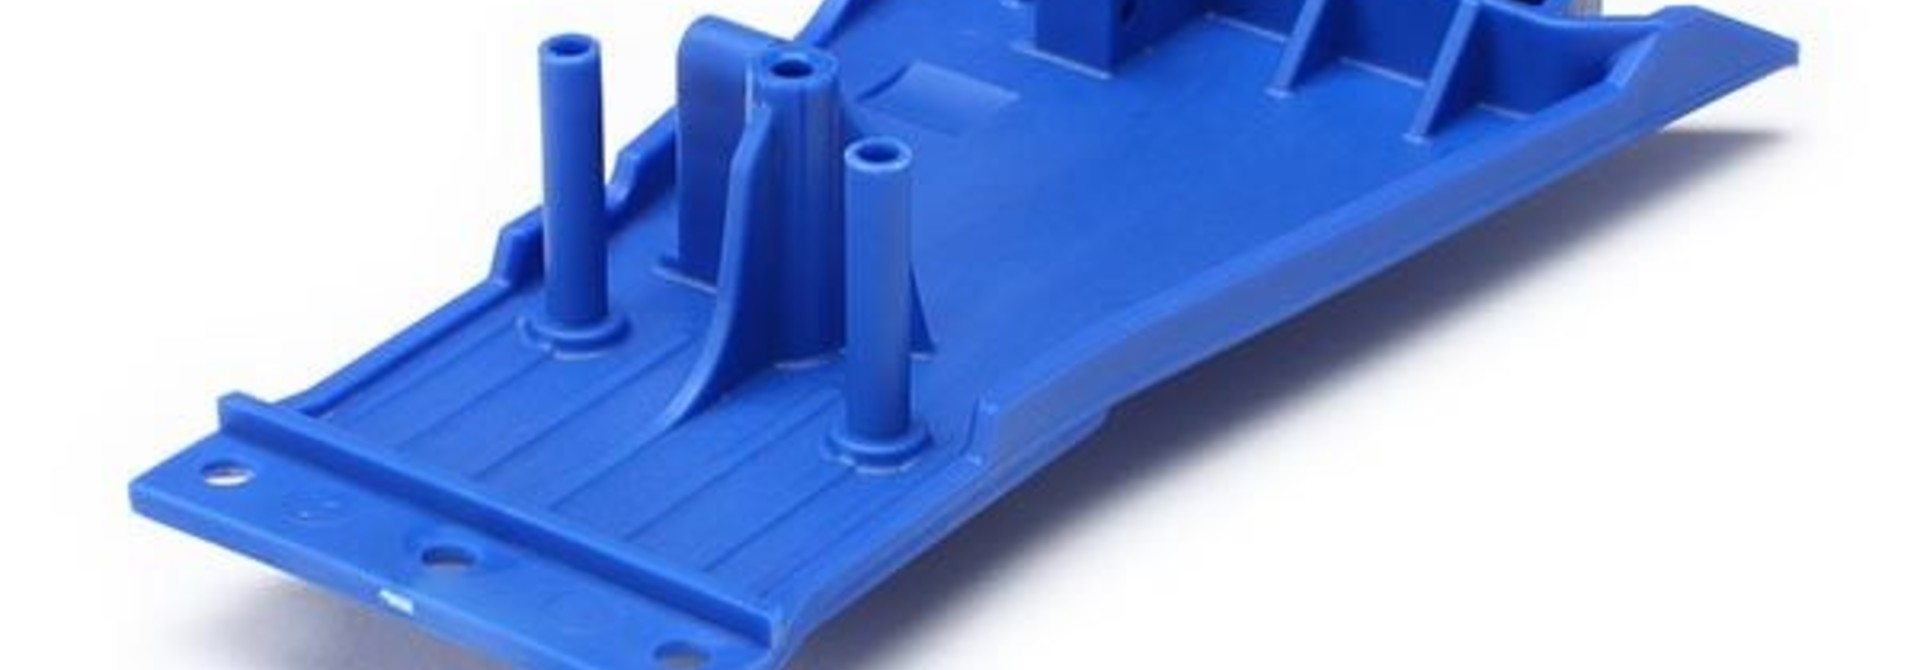 Lower Chassis, Low Cg (Blue), TRX5831A